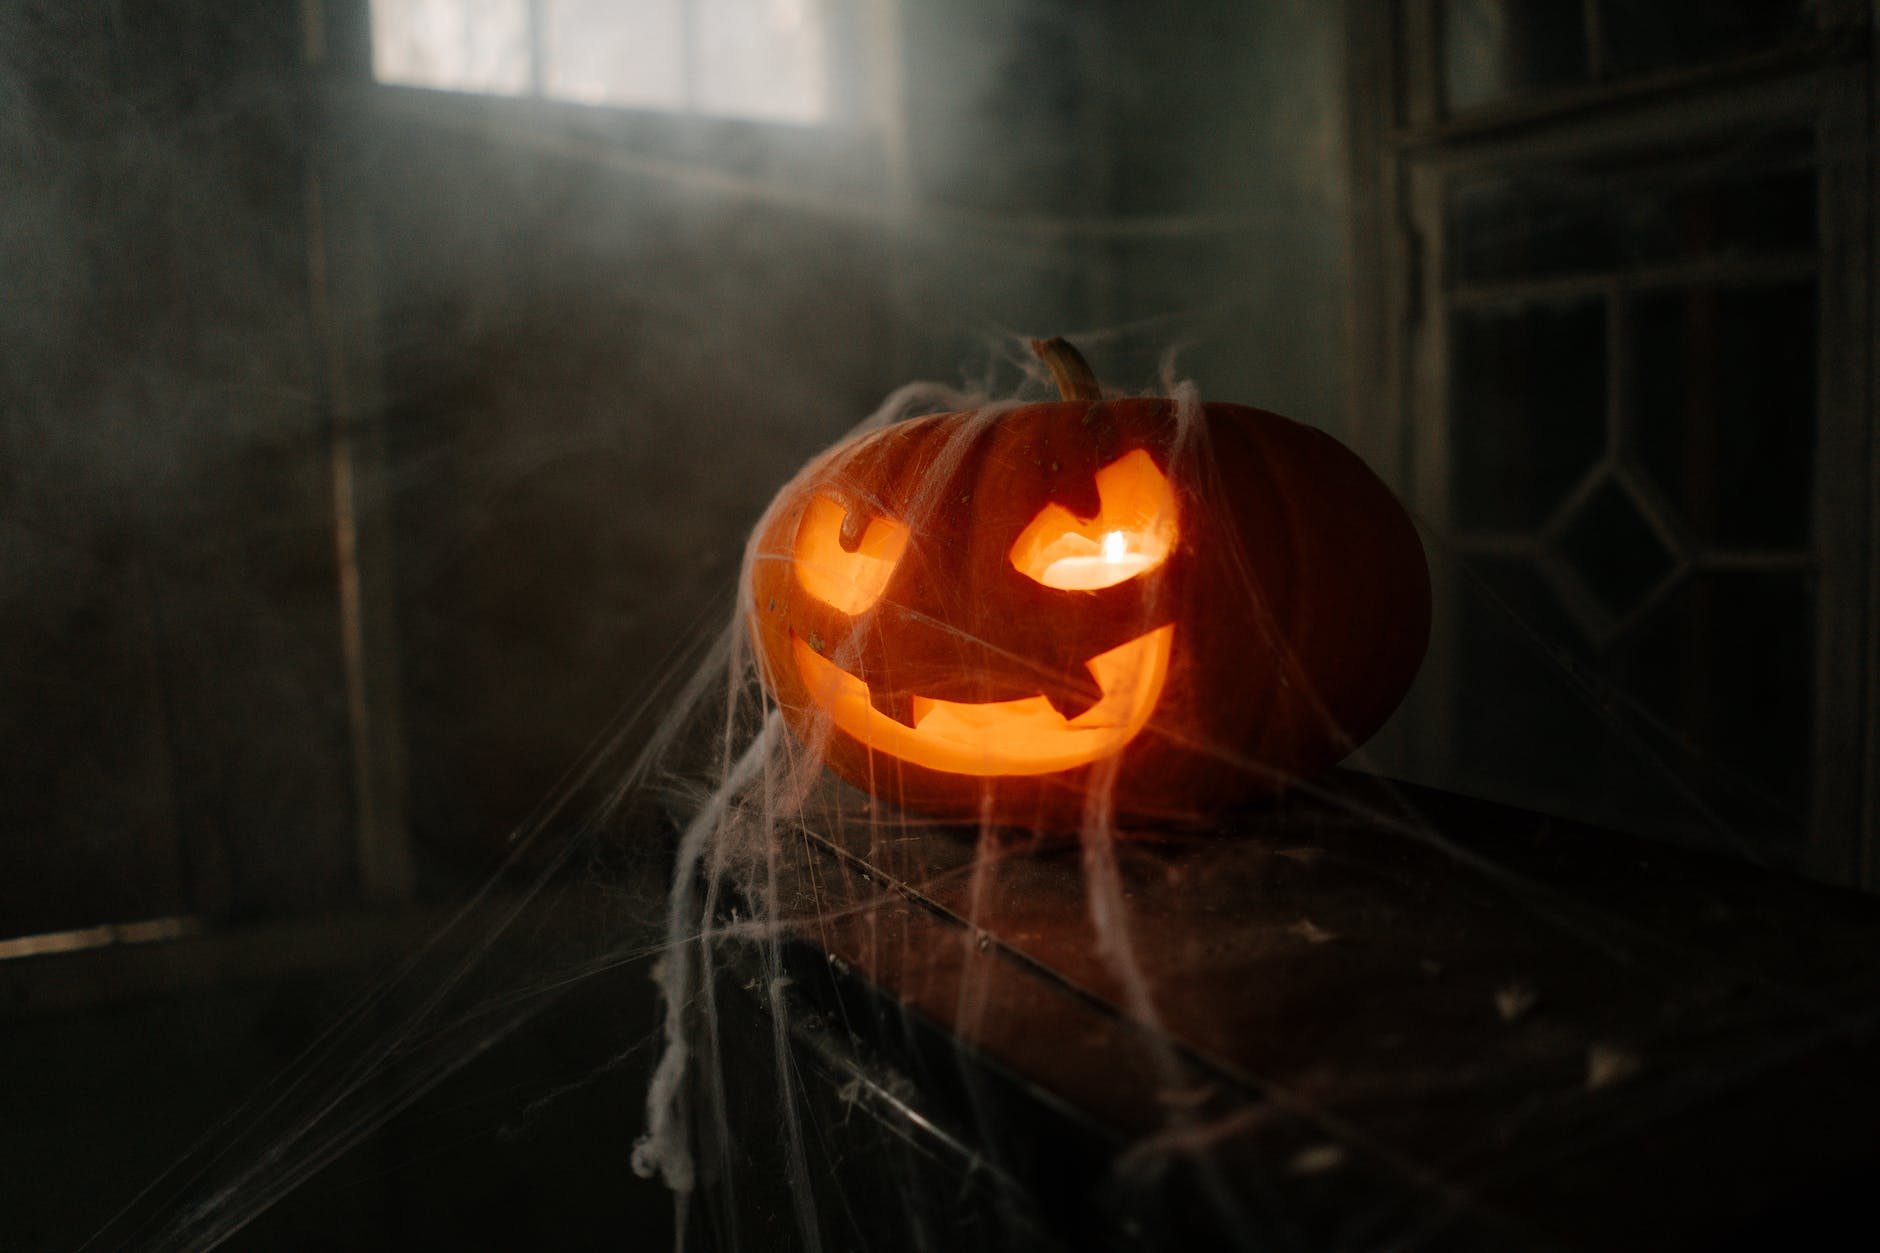 Boo! Is Halloween good for your health?